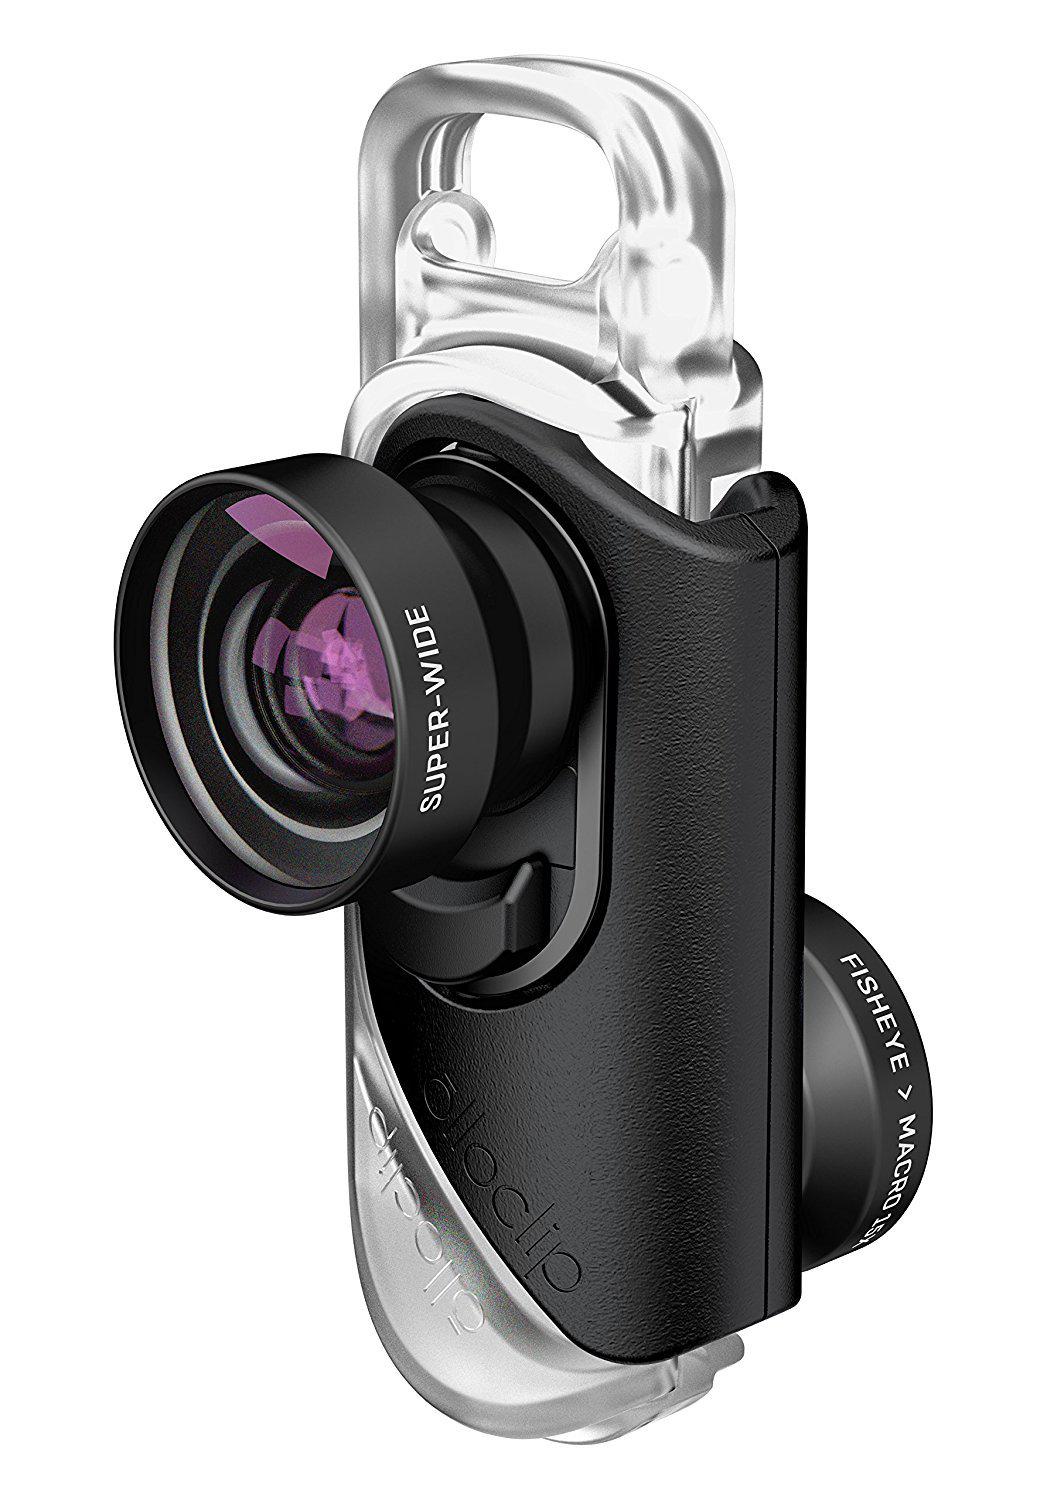 OLLOCLIP 3-In-1 Lens With Pendant And Stand Black / Black for iPhone 8-7/8-7 Plus